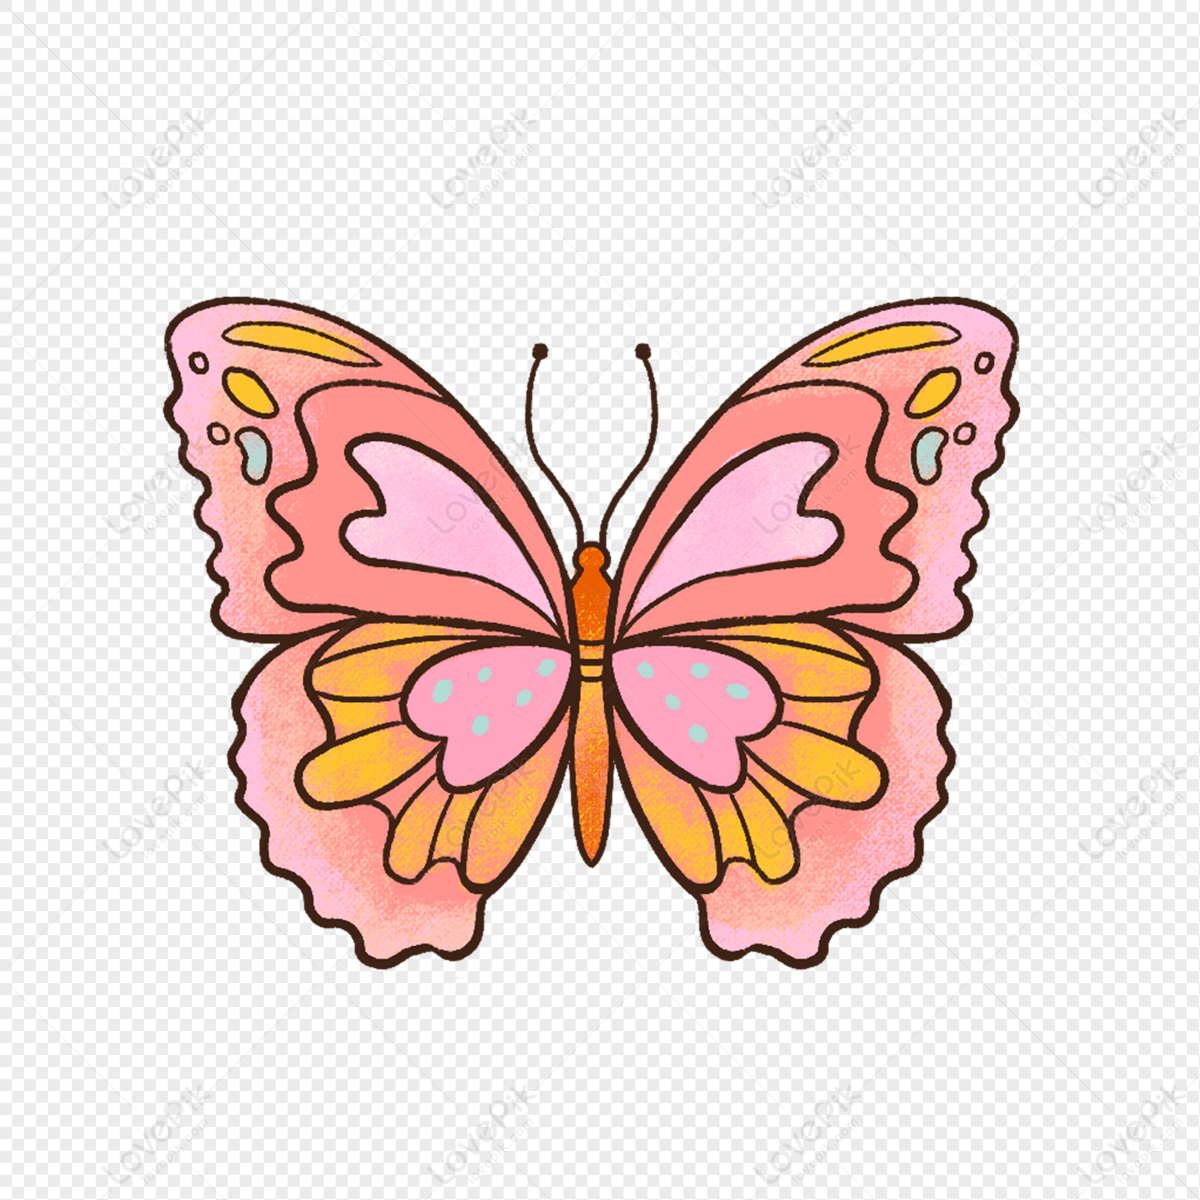 Flower Butterfly PNG Transparent Background And Clipart Image For Free  Download - Lovepik | 401698460